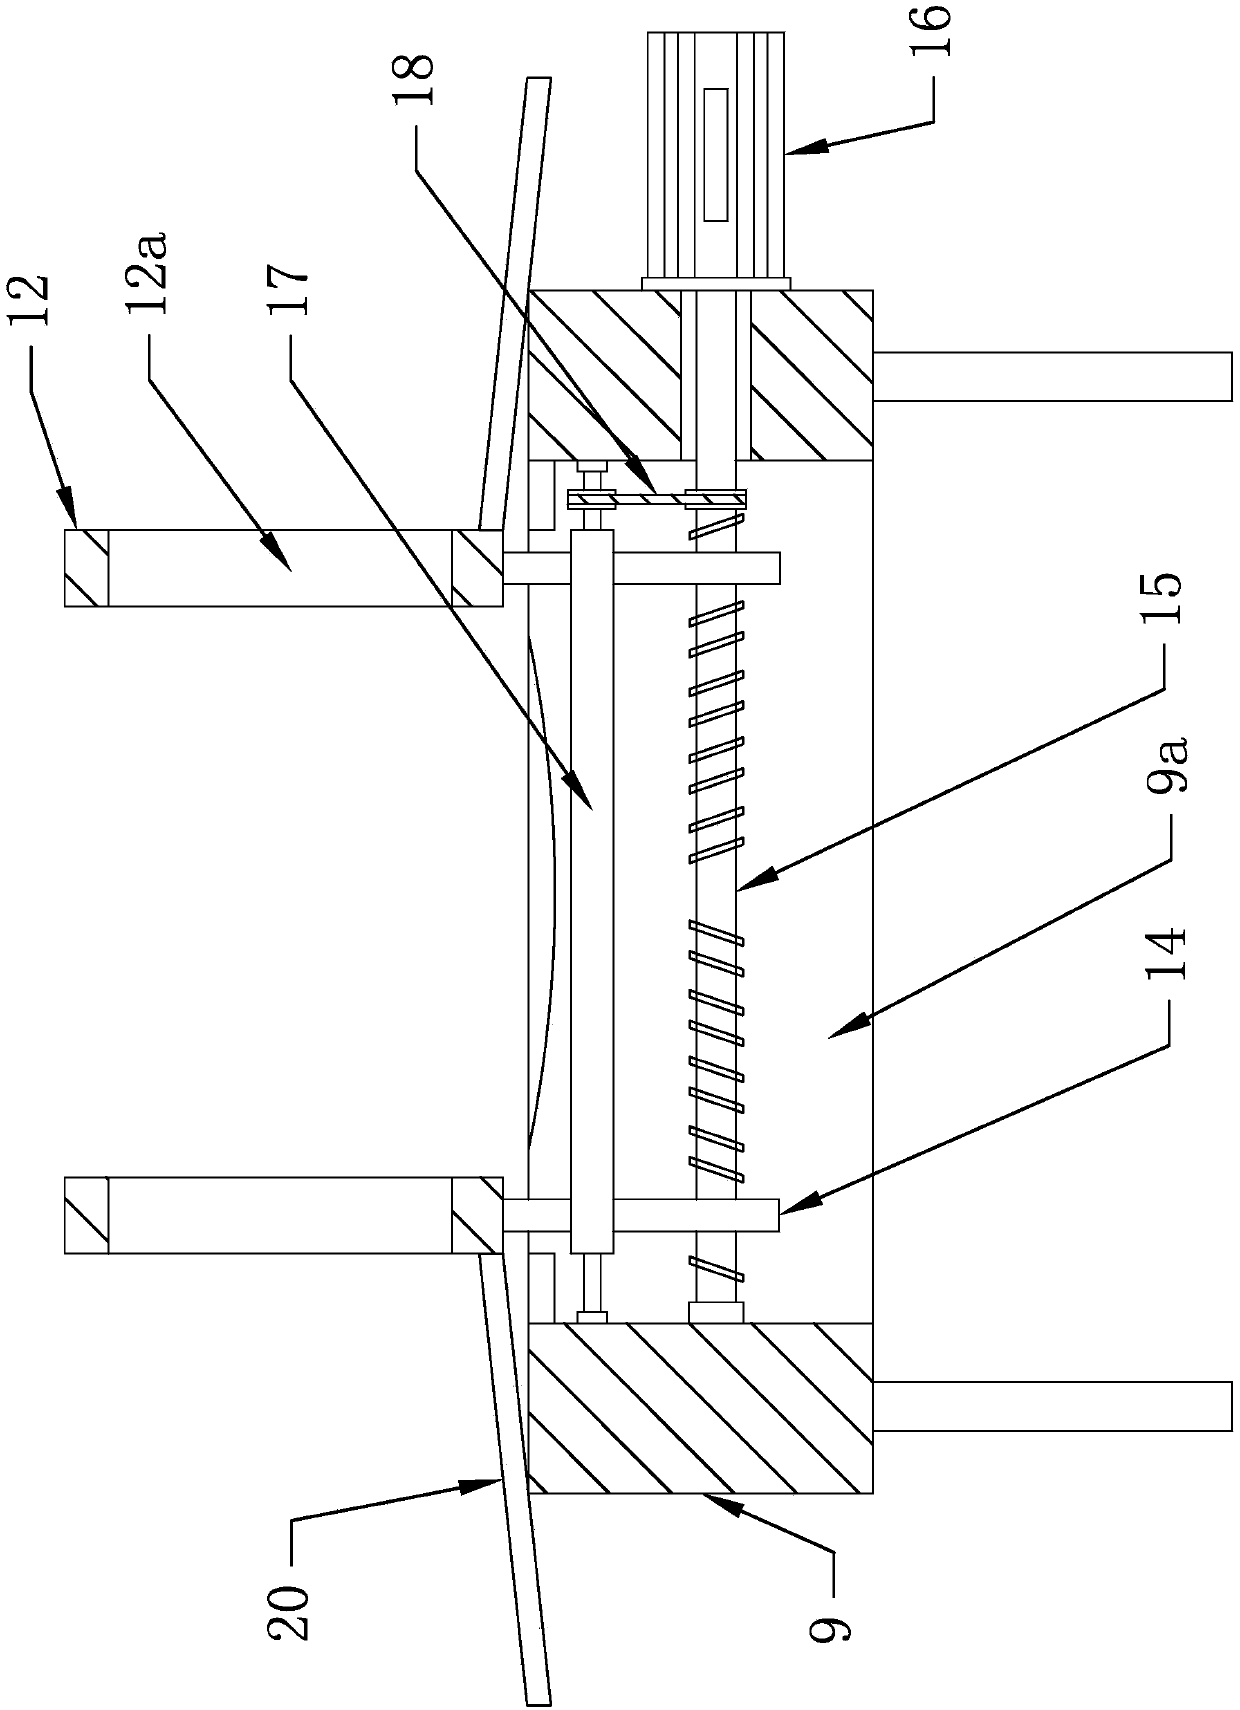 Turnover clamping mechanism in kiwi fruit juicing integrated machine